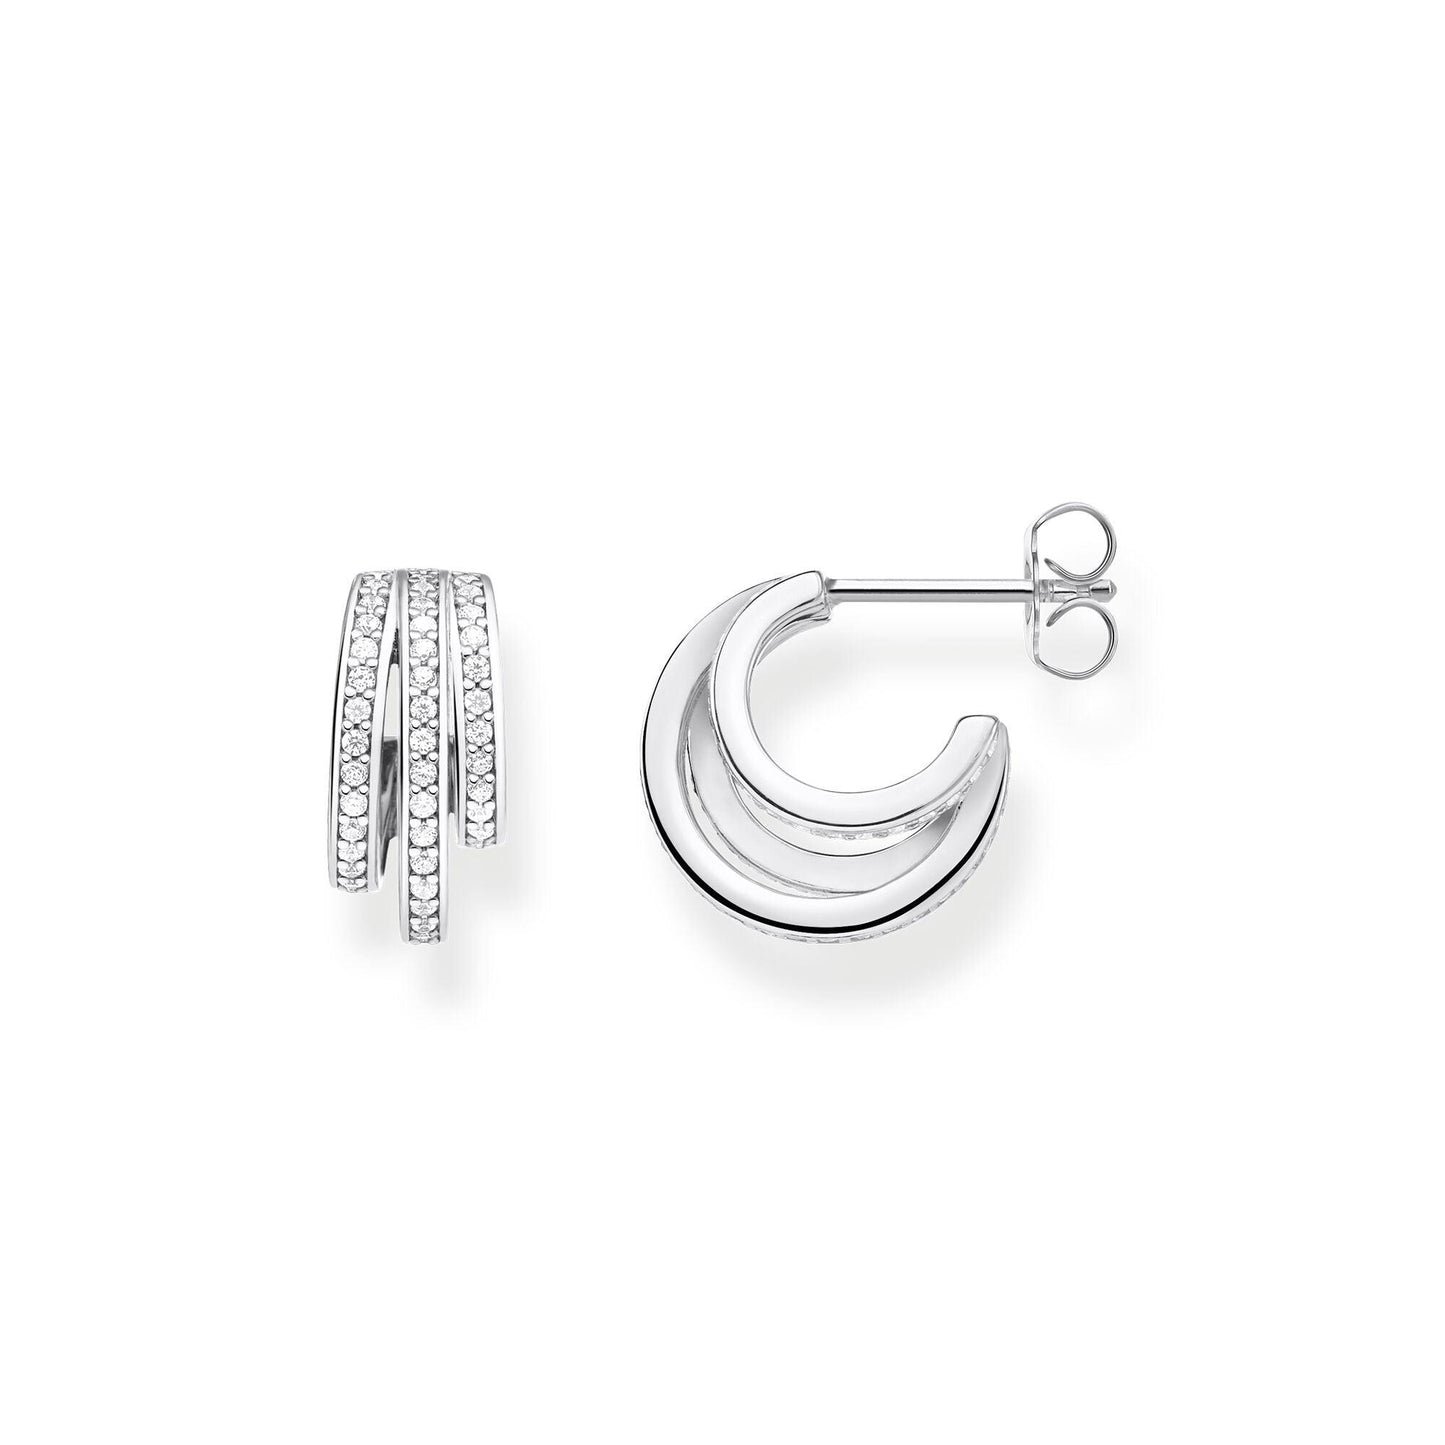 Thomas Sabo Sterling Silver Triple Row Hoops with Cubic Zirconia CR652-051-14 - Judith Hart Jewellers